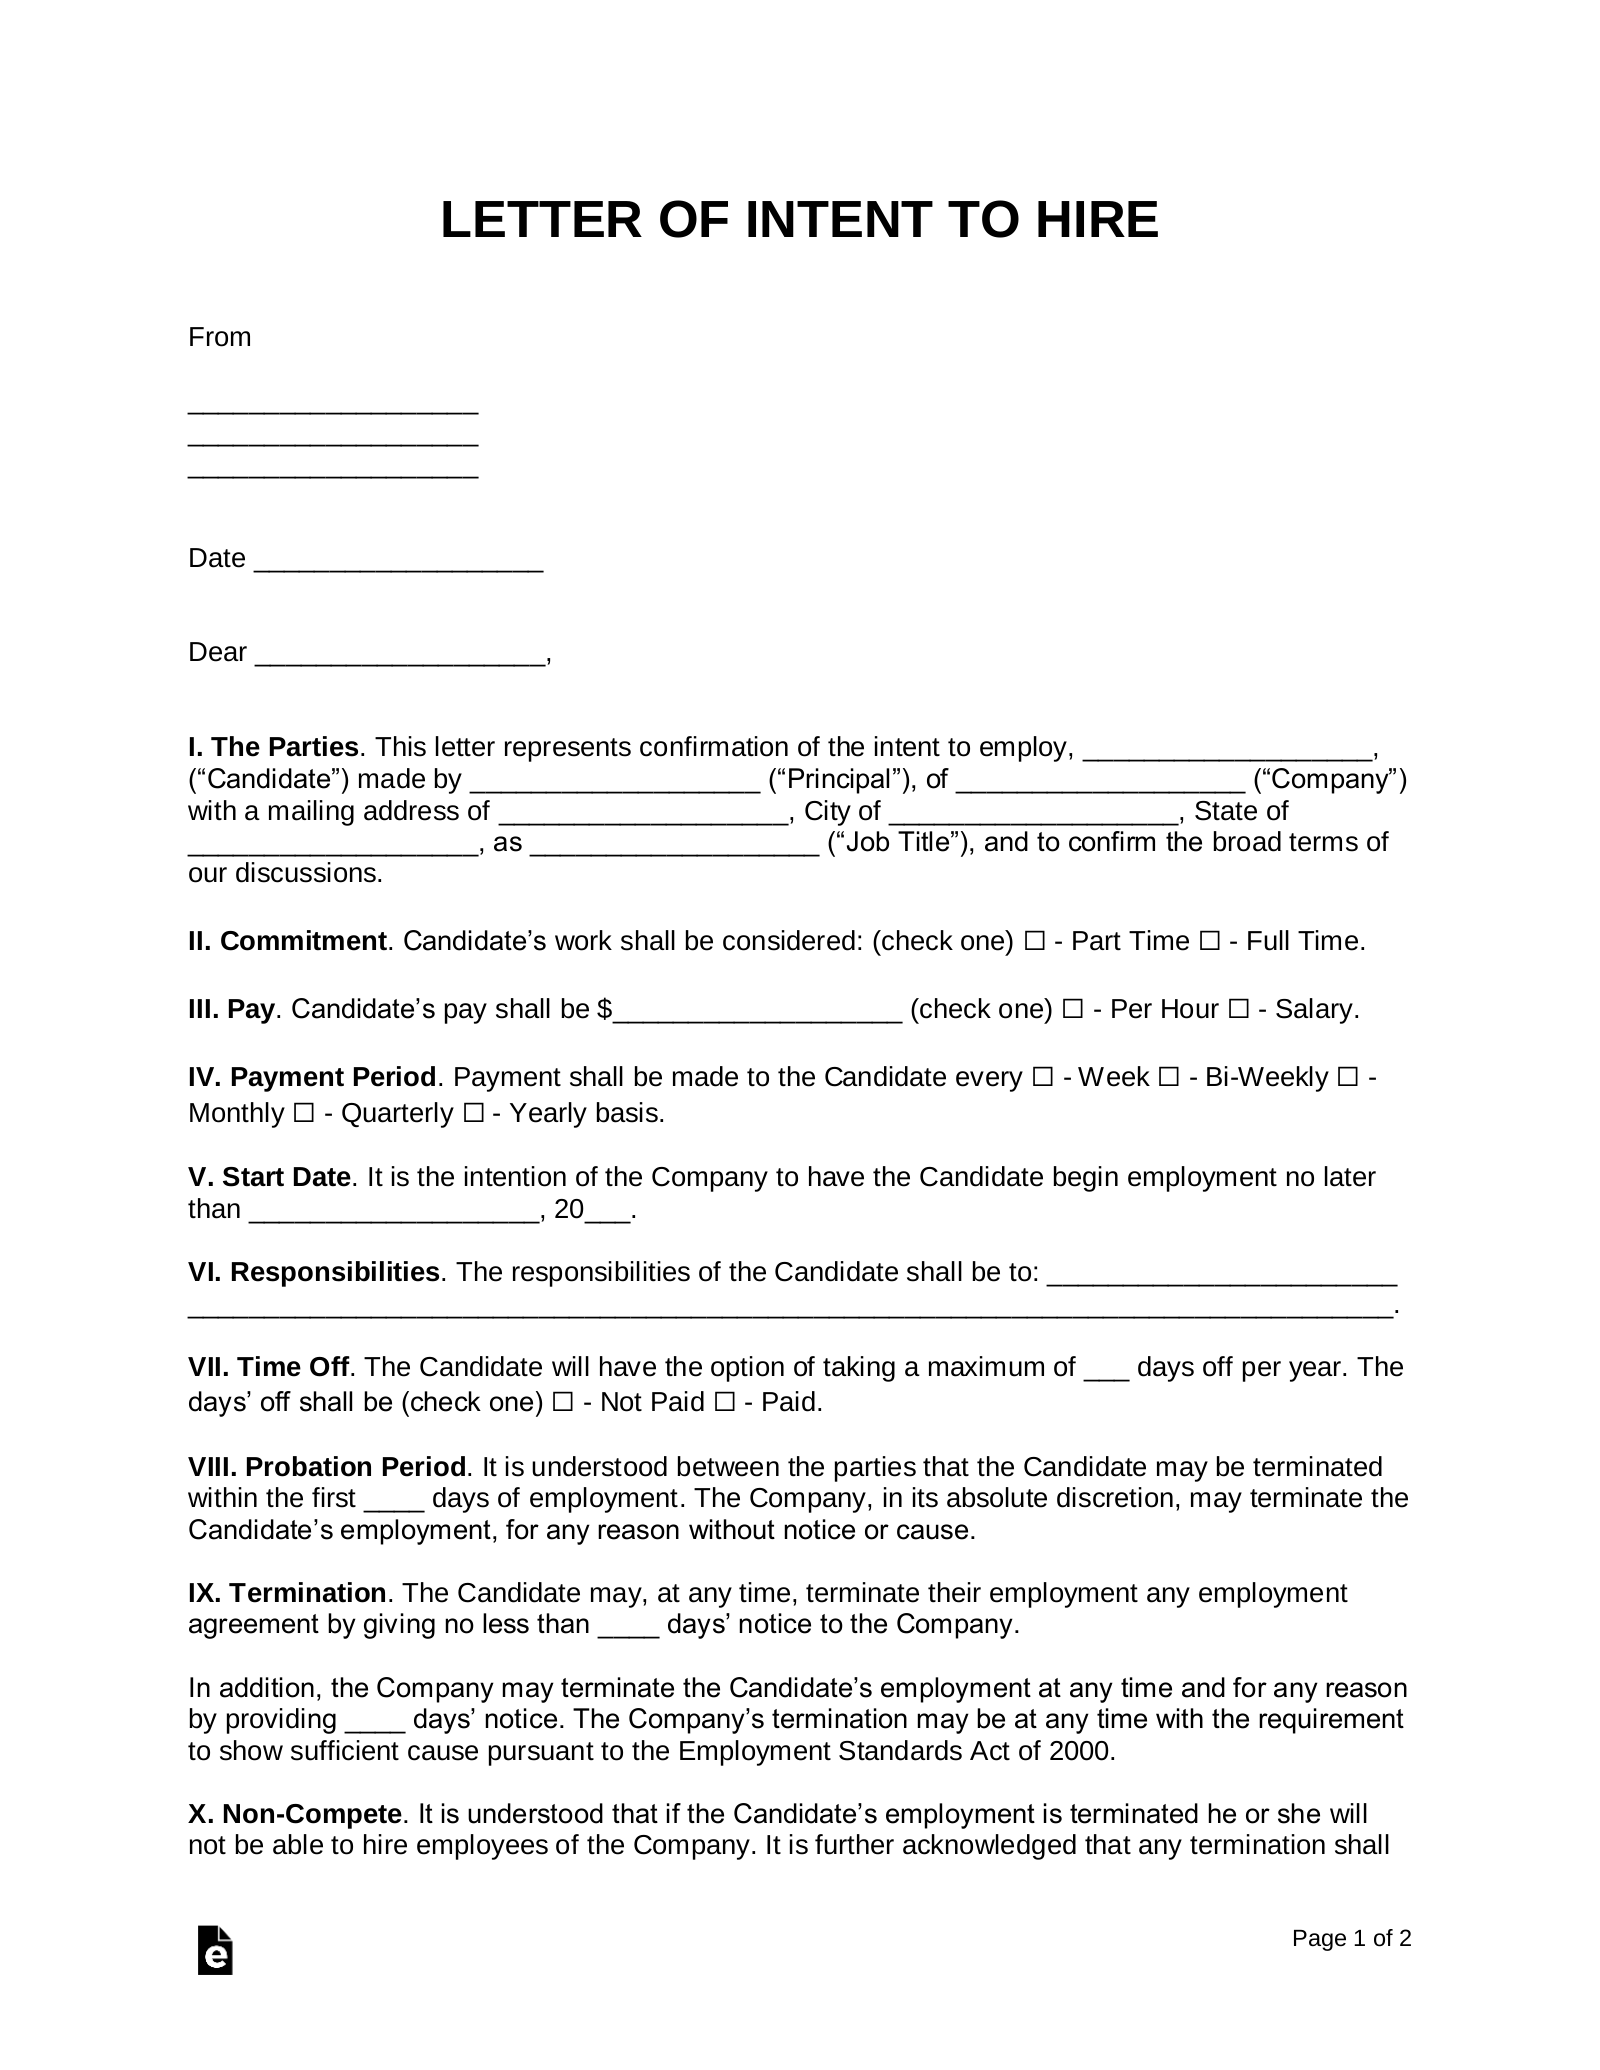 Sample Of Letter Of Intention from eforms.com